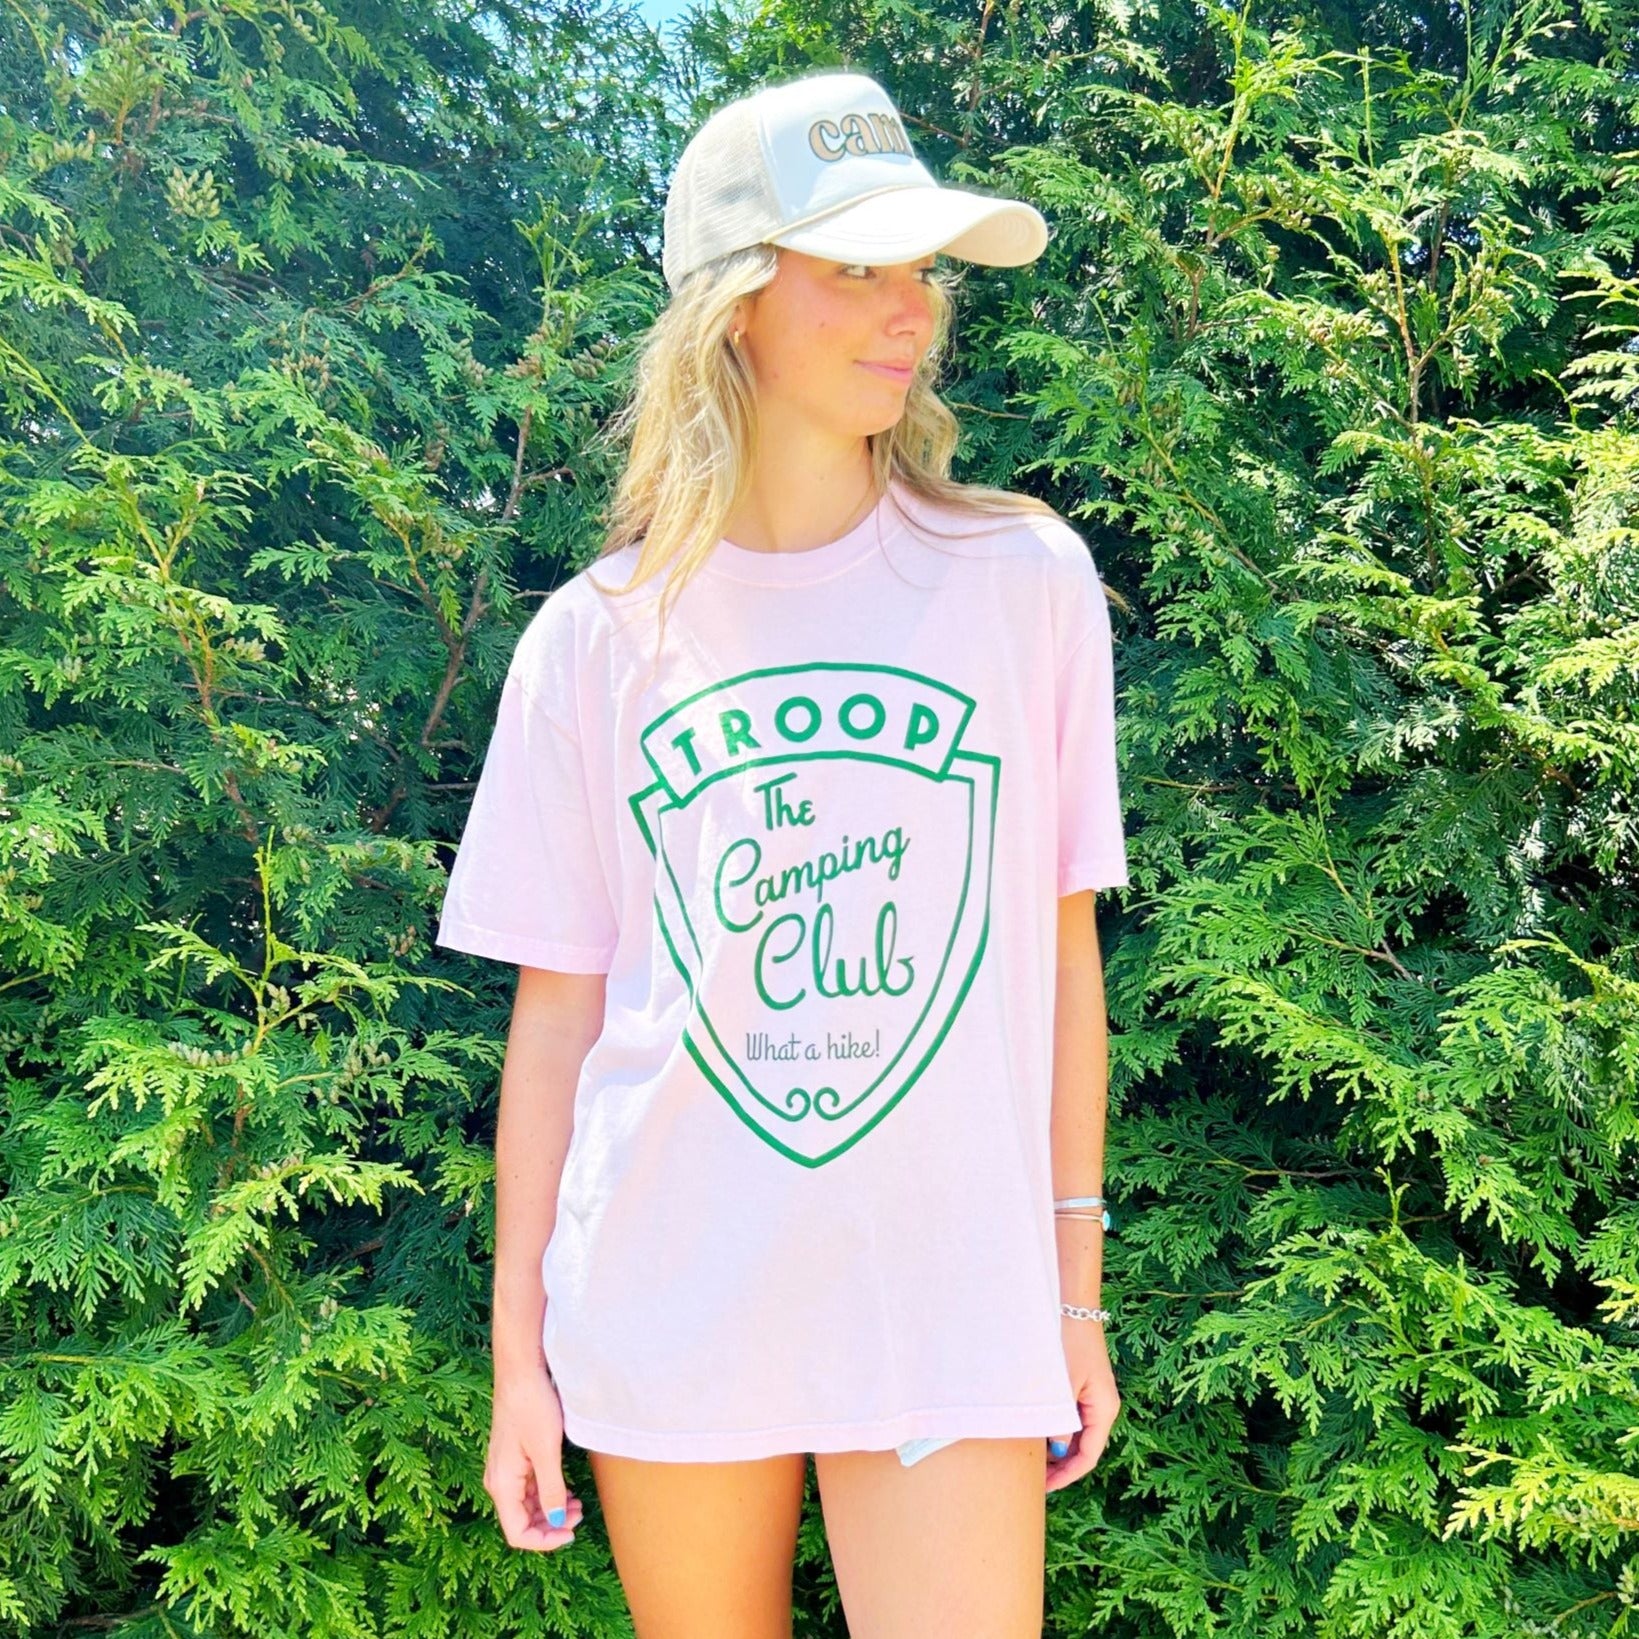 The Camping Club Tee